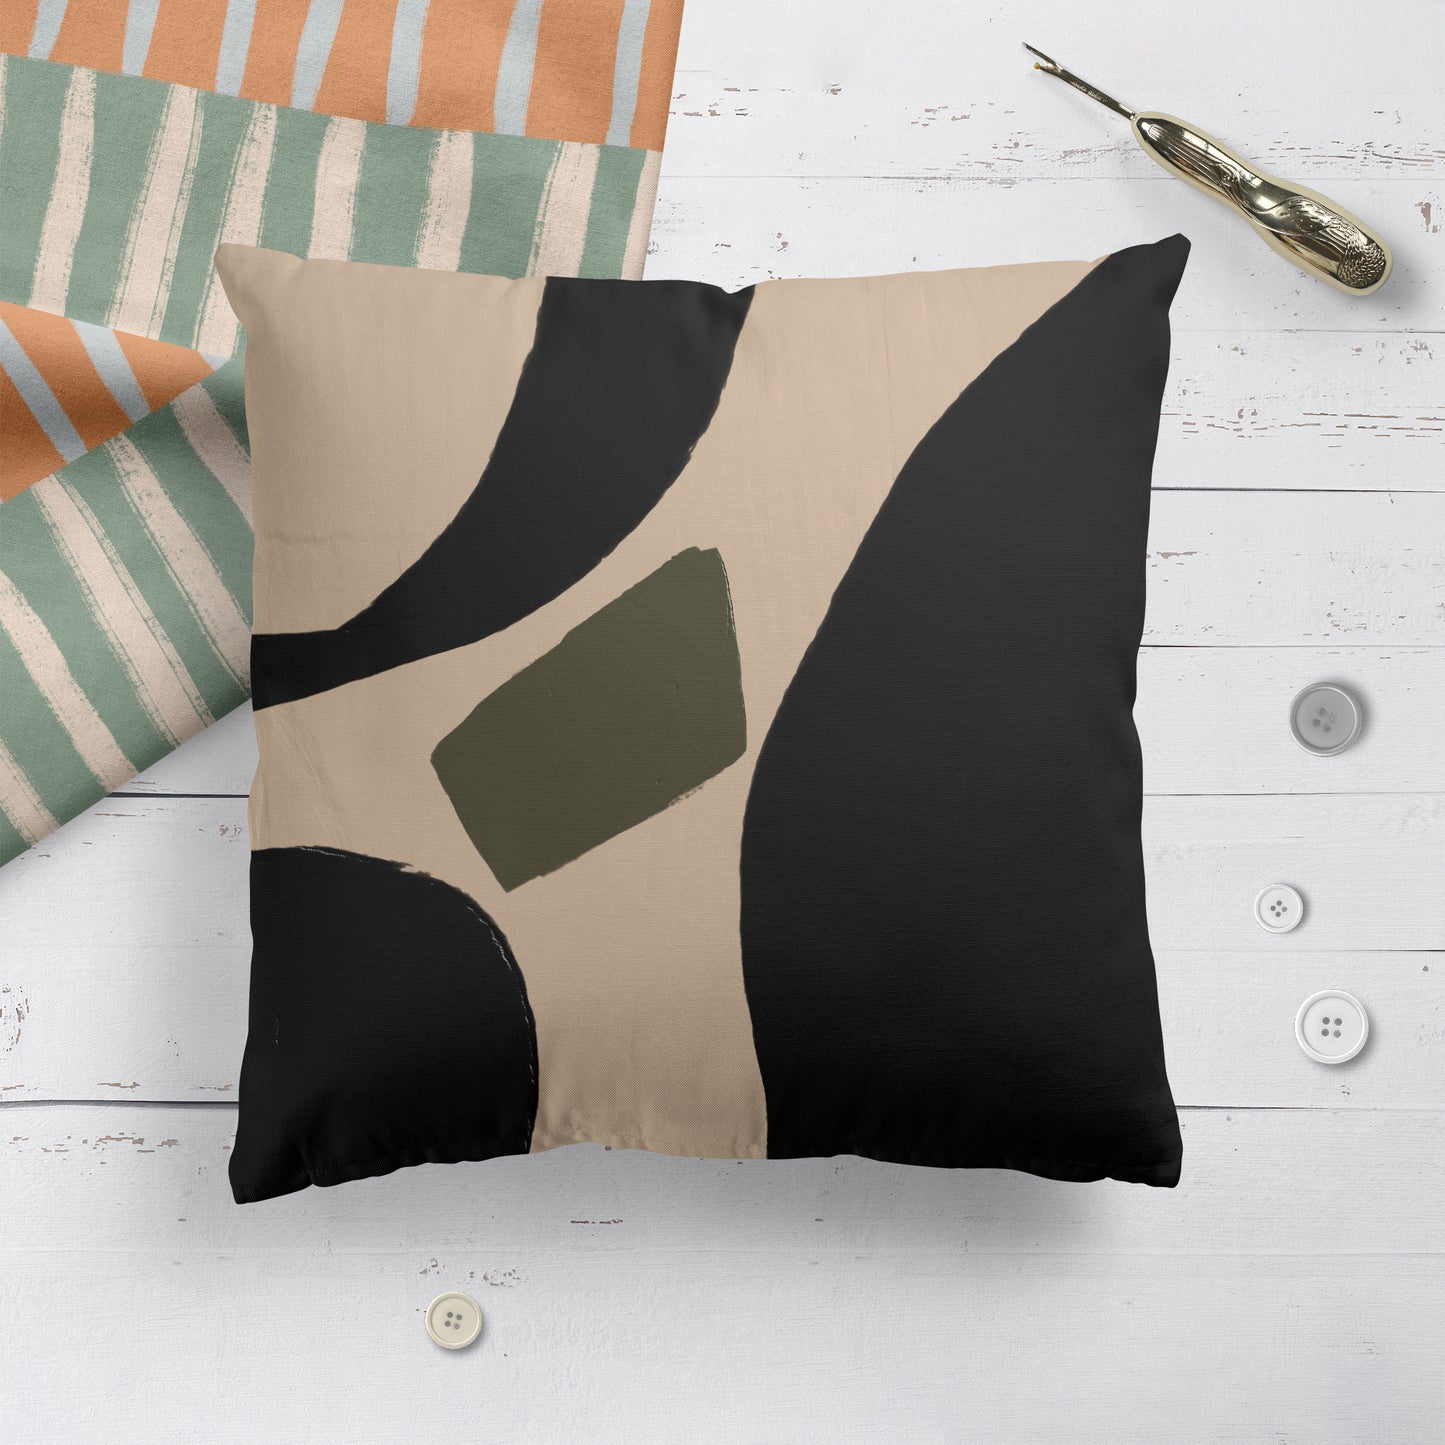 Modern Abstract Black Shapes Throw Pillow